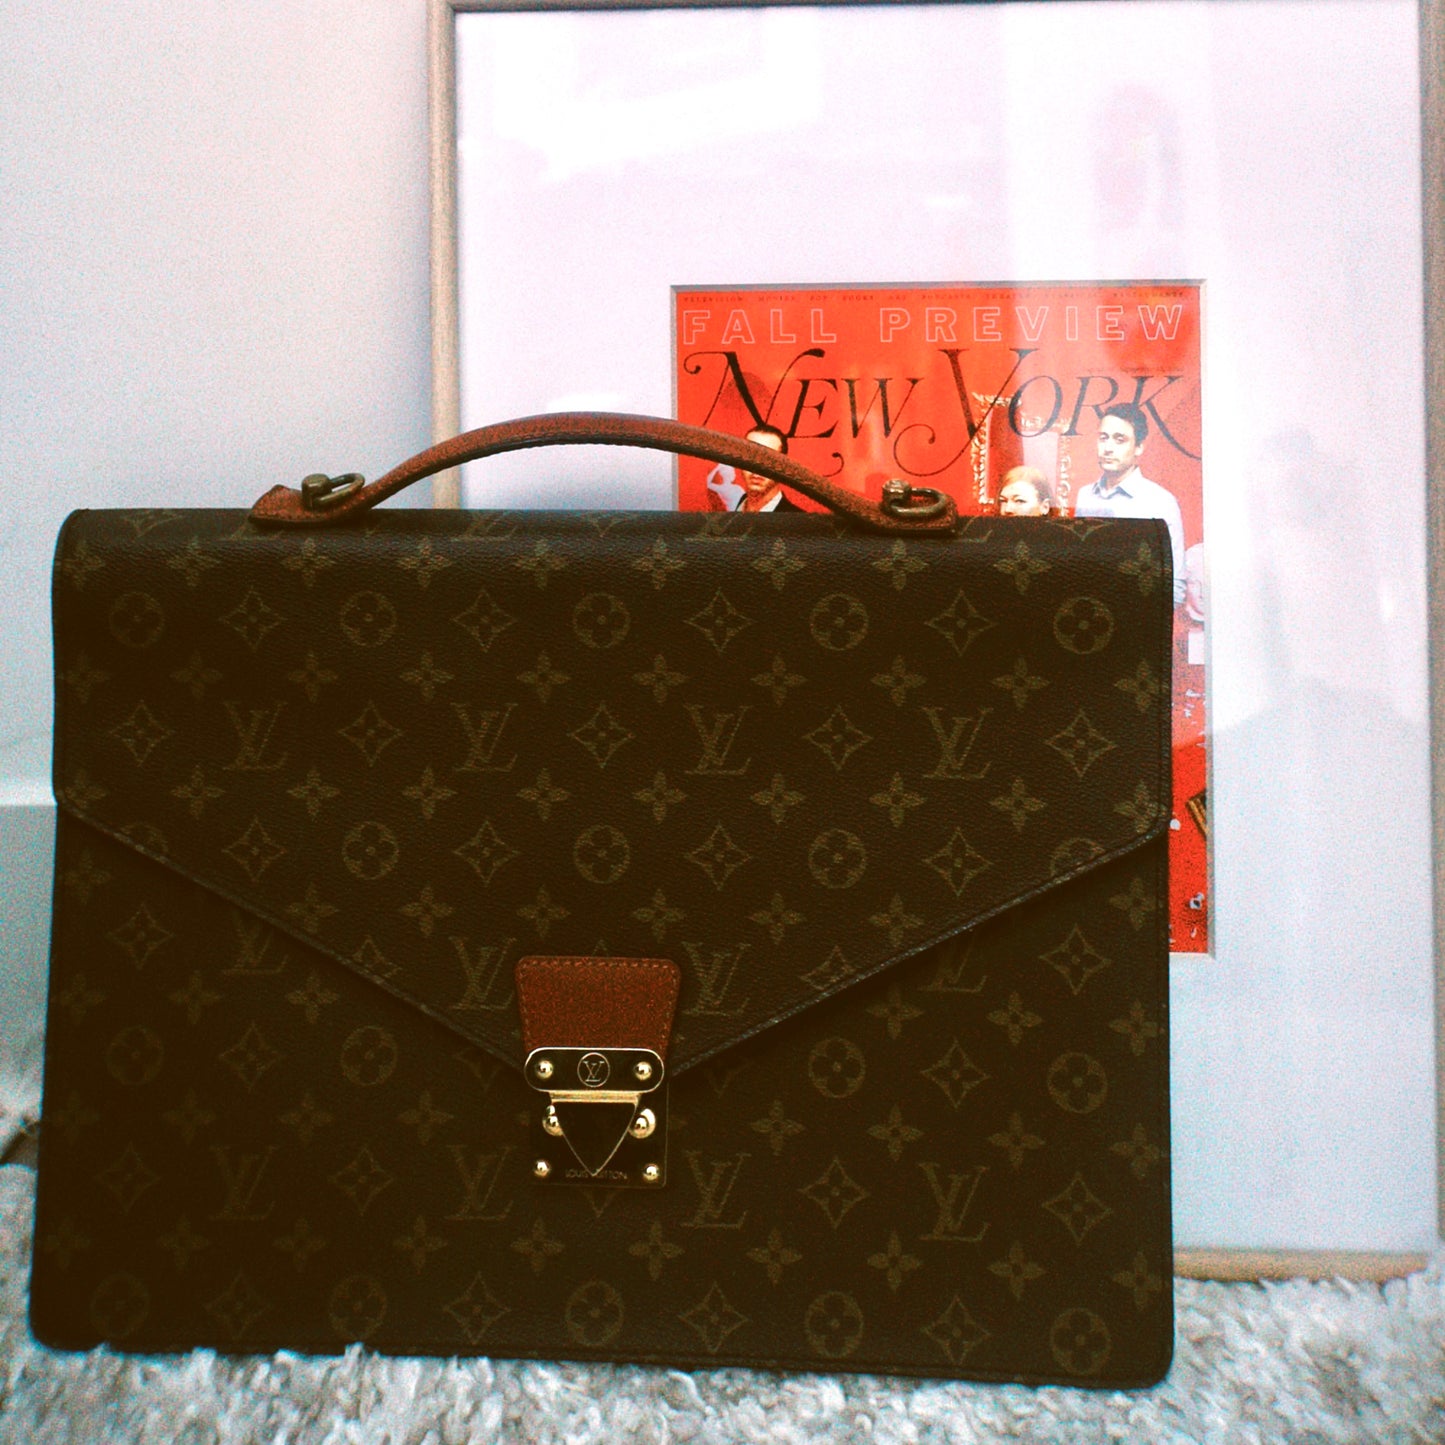 Louis Vuitton President Briefcase For Sale at 1stDibs